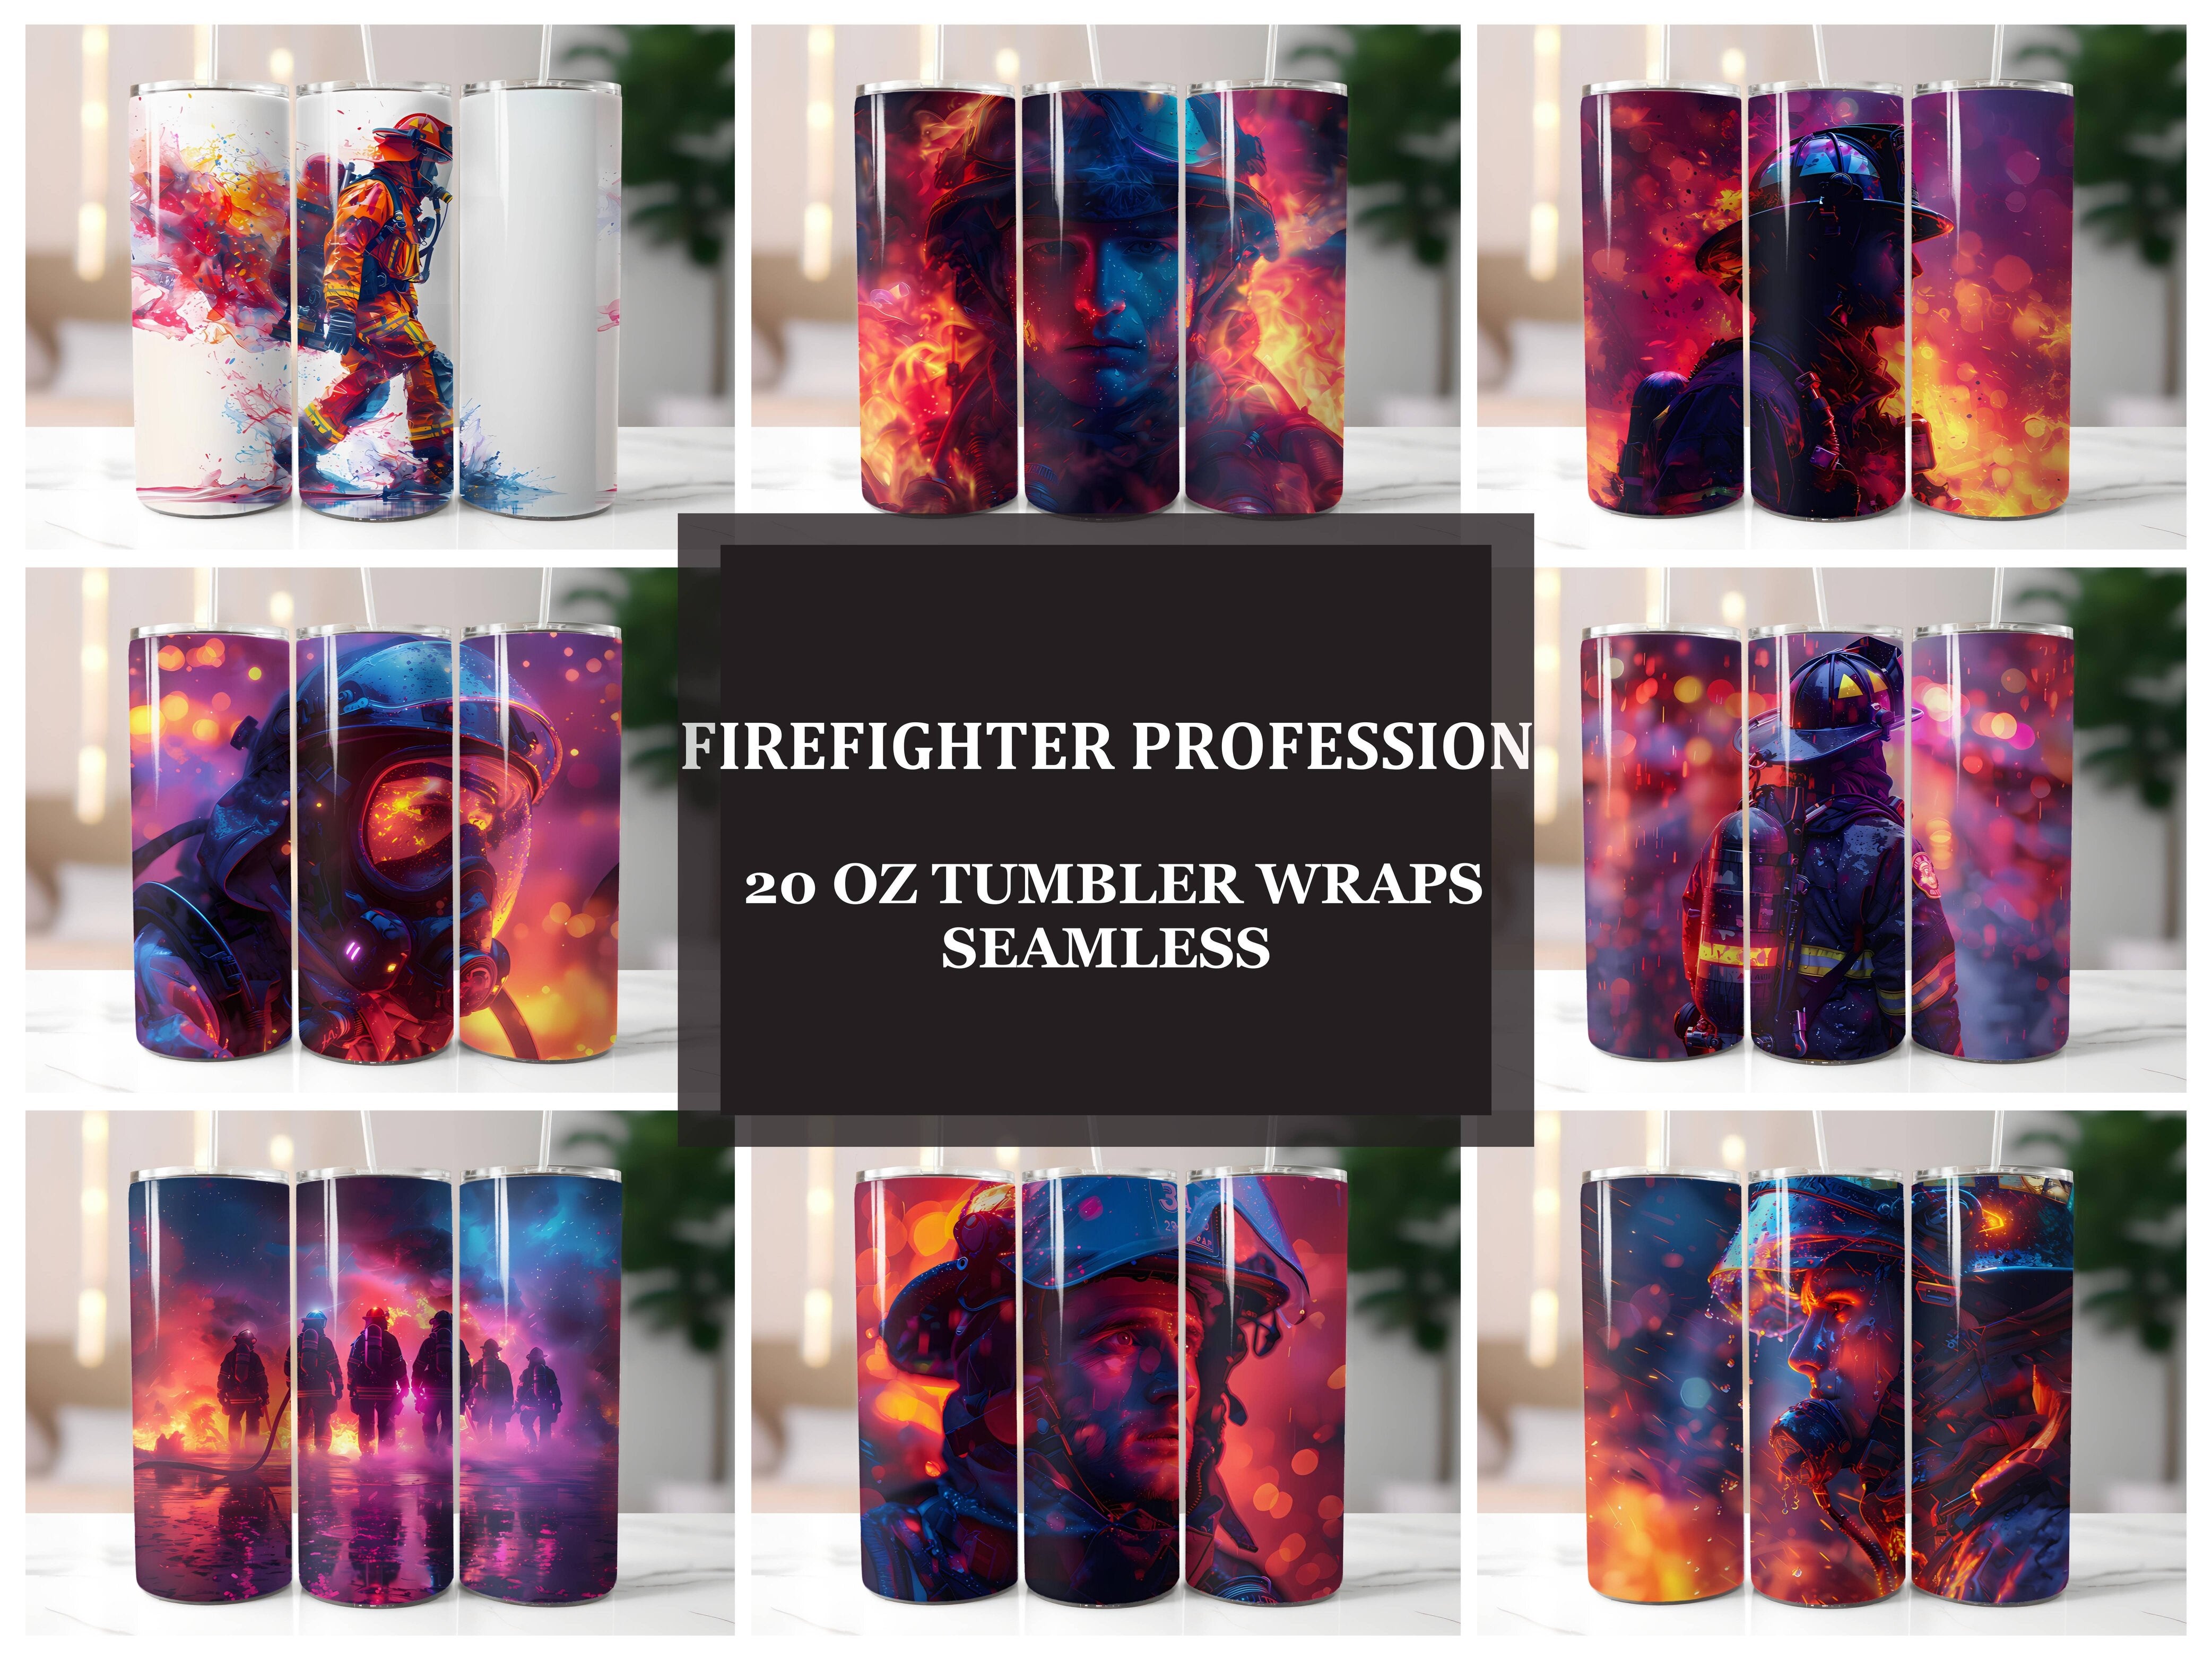 Firefighter Profession 1 Tumbler Wrap